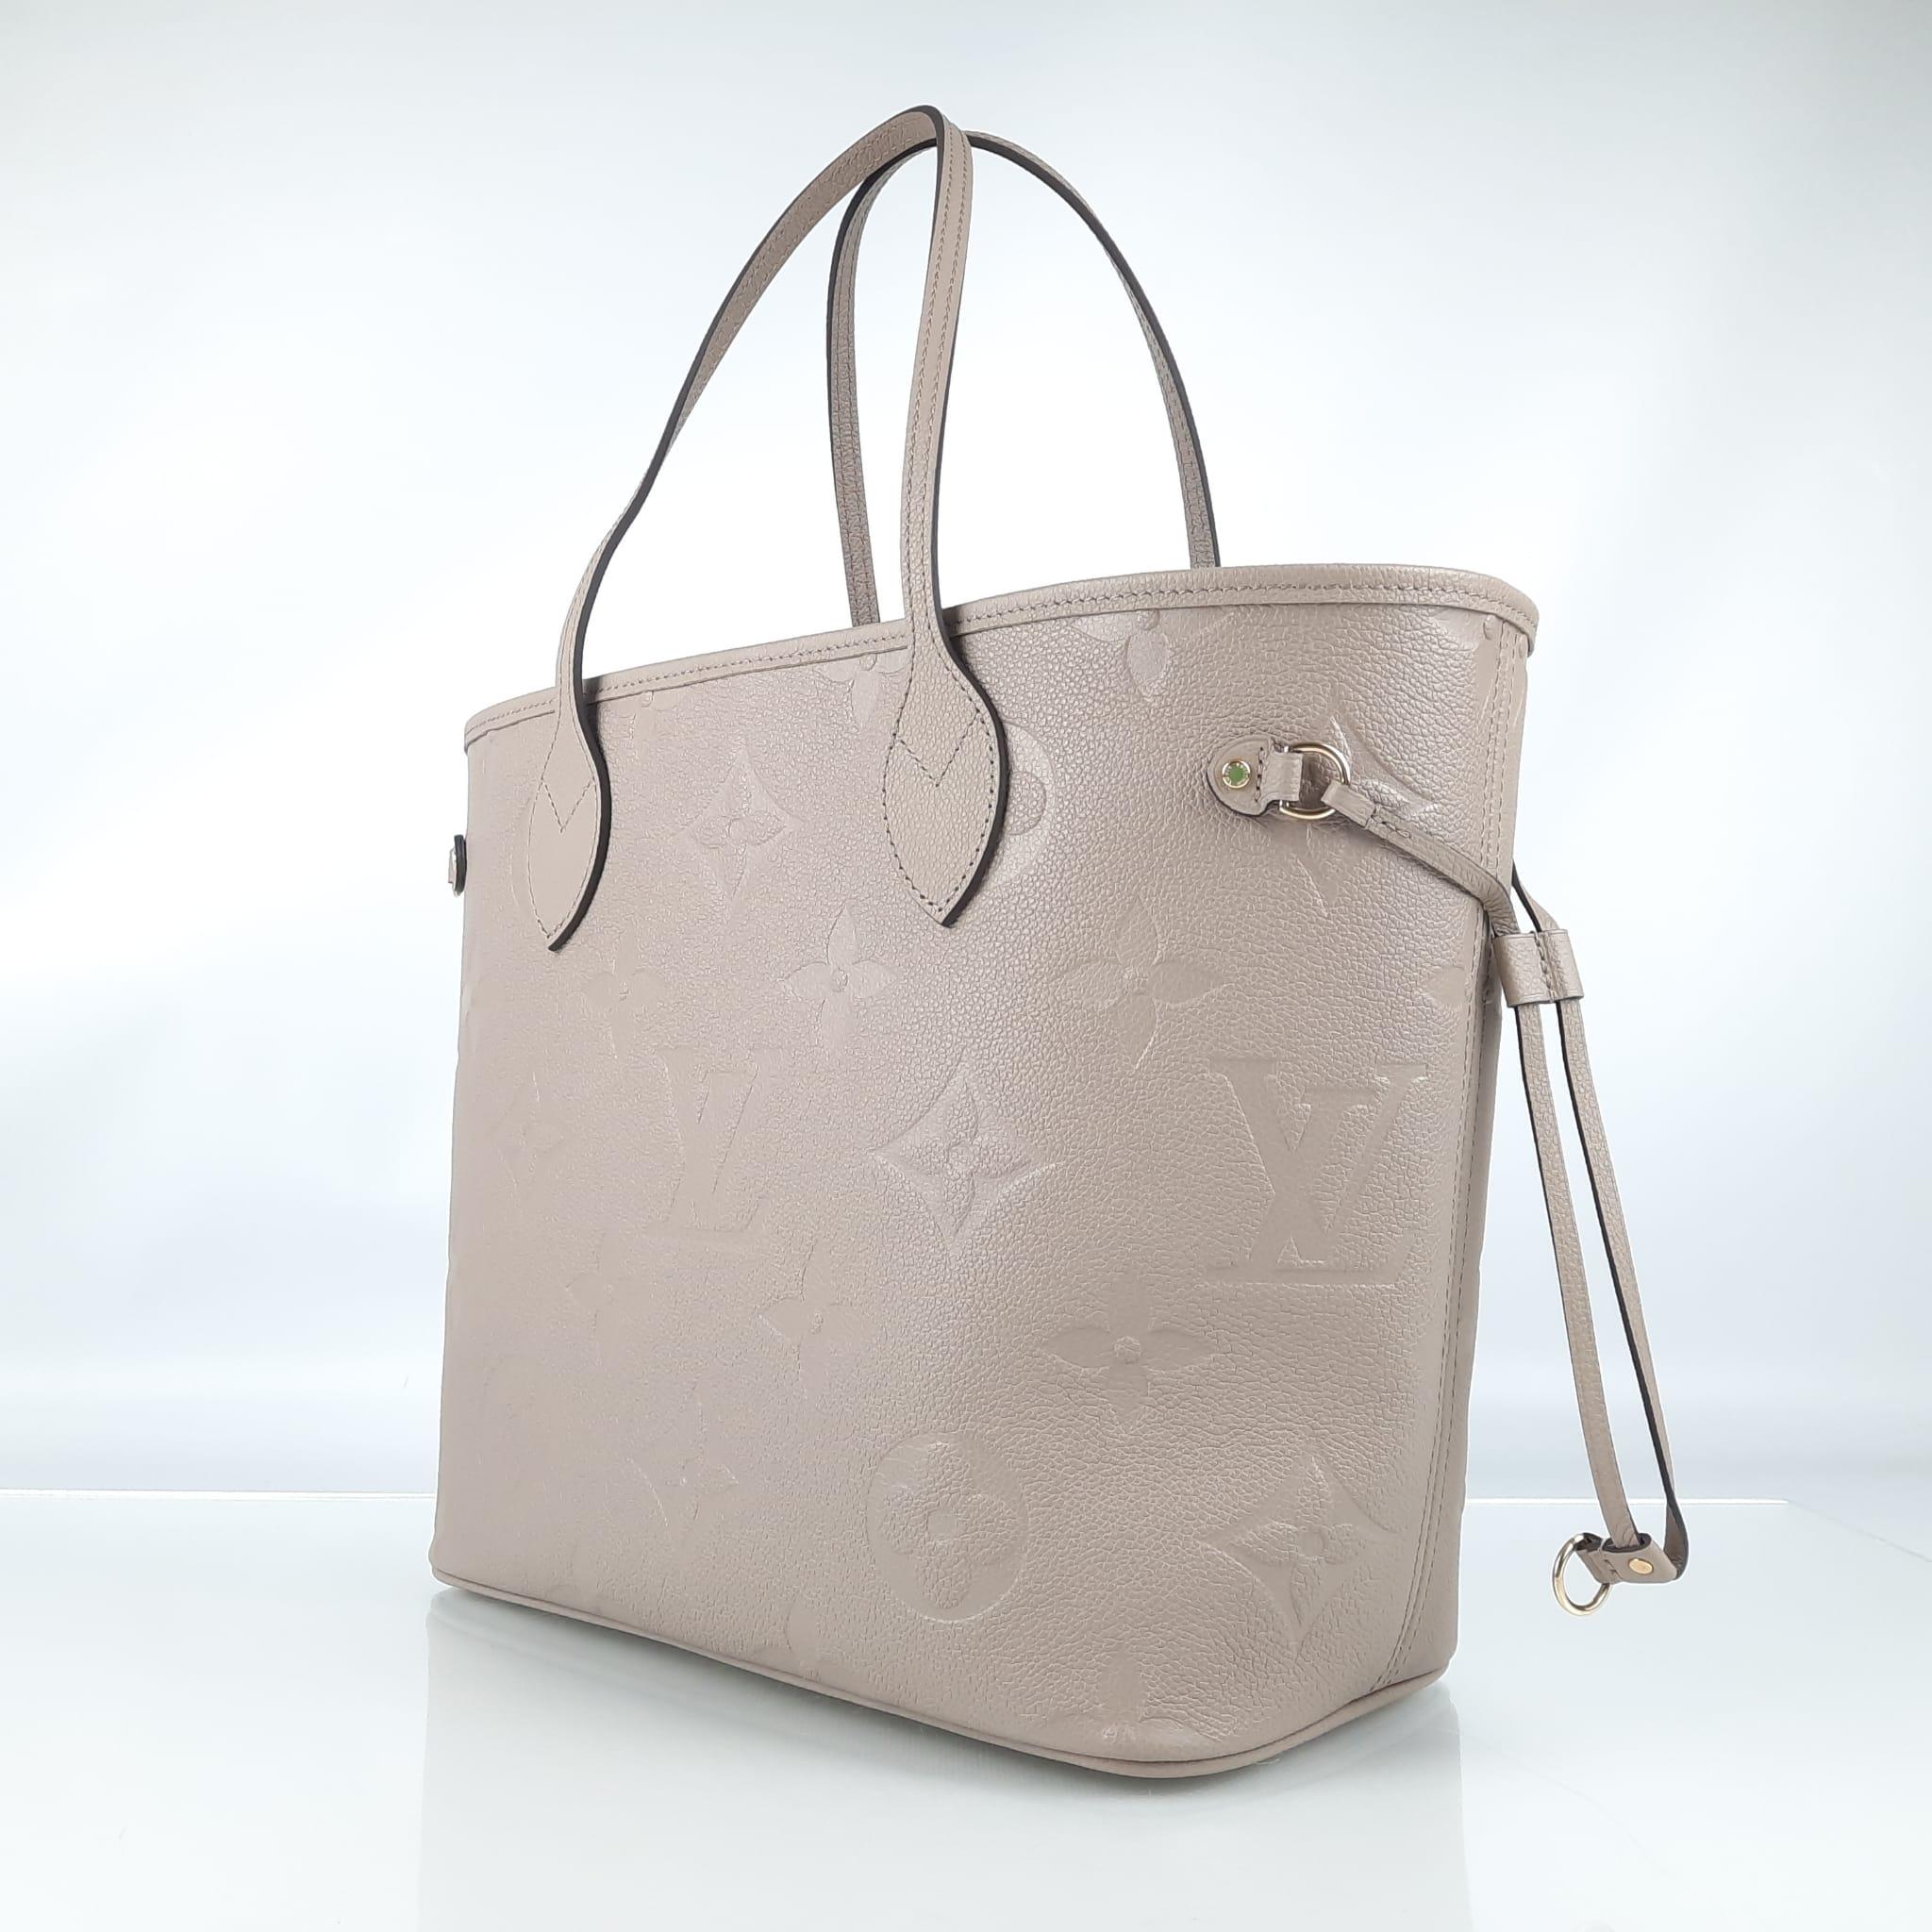 The essential Neverfull MM tote bag now comes in embossed Monogram Empreinte leather. Its generous dimensions make this bag ideal for everyday use, while the long shoulder handles and supple leather mean it is comfortable to carry. With the side